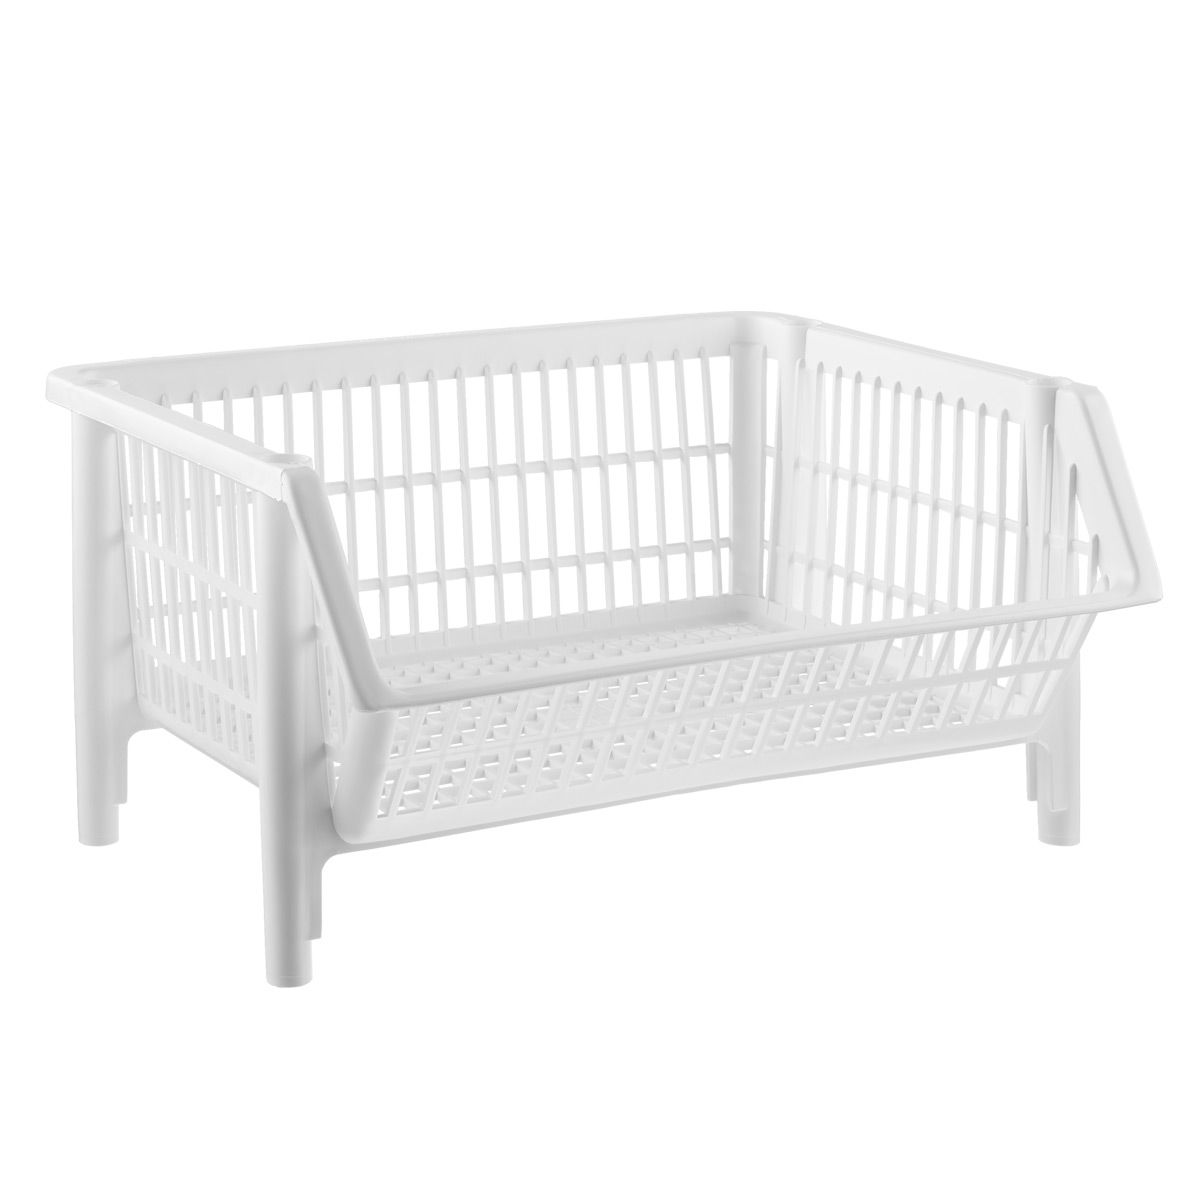 Our Large Stackable Basket White | The Container Store